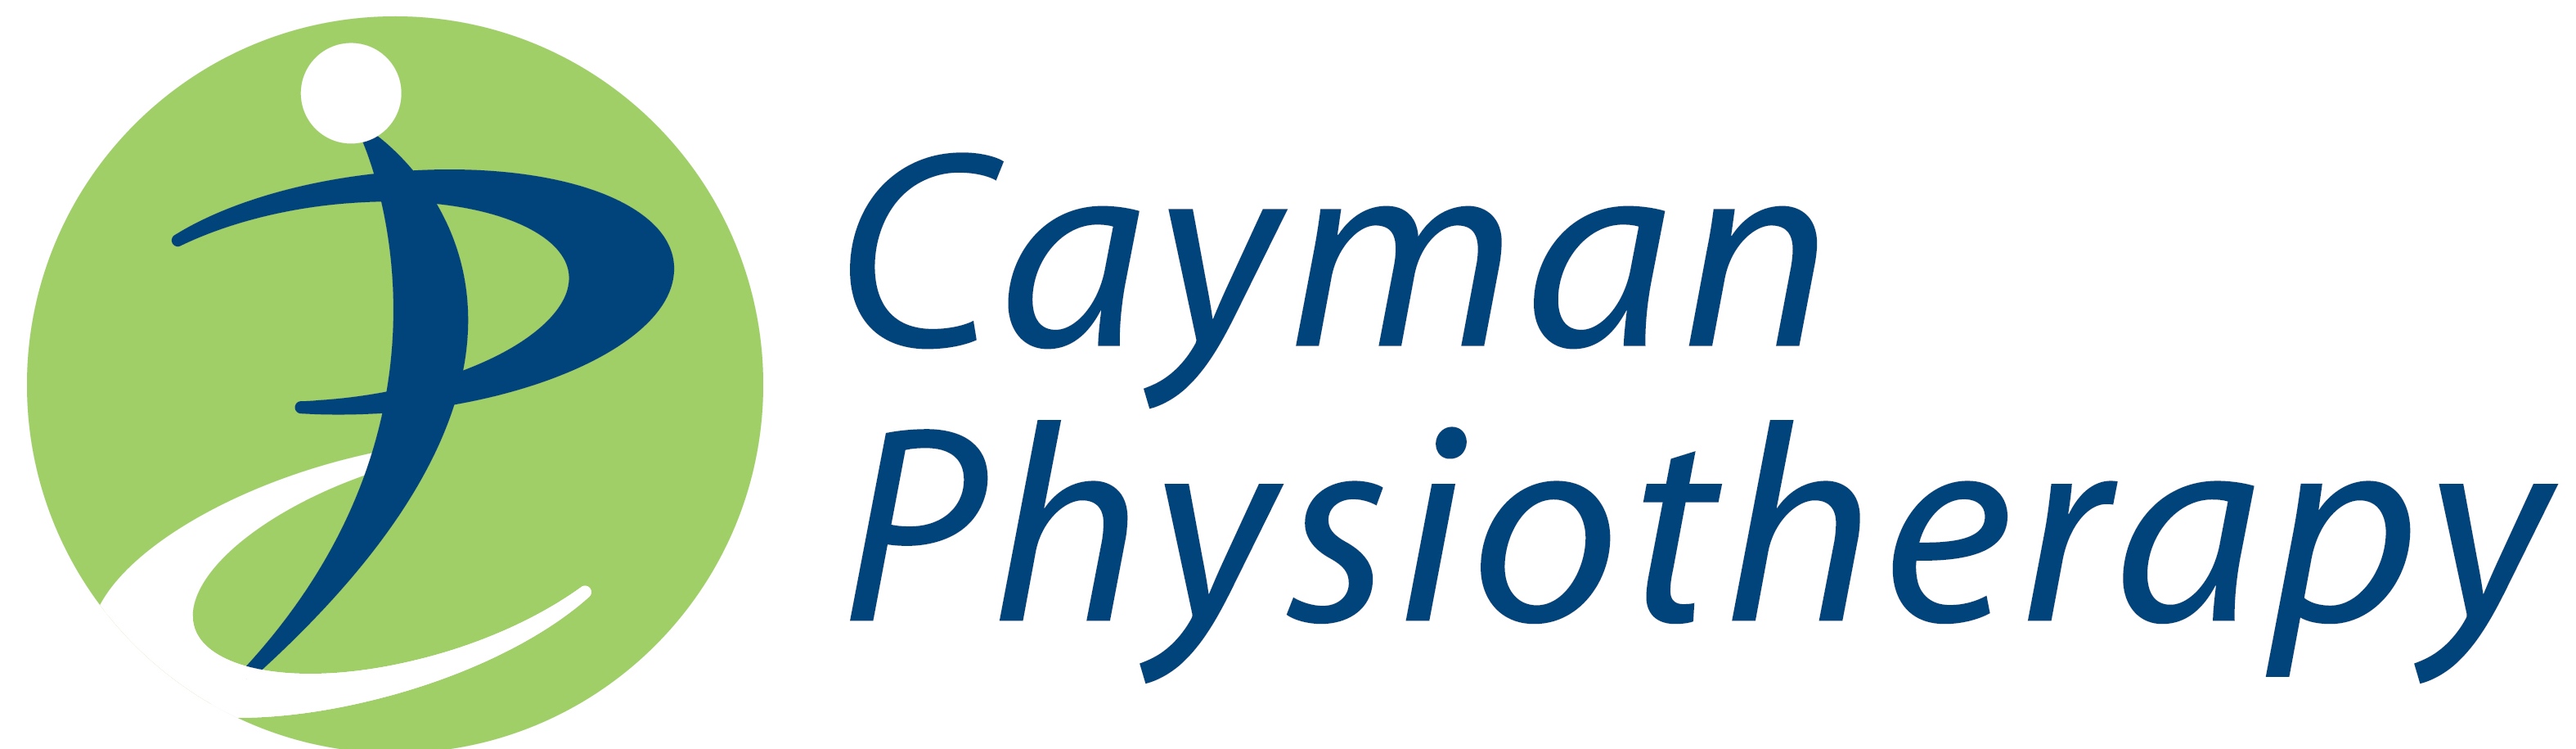 Cayman Physiotherapy